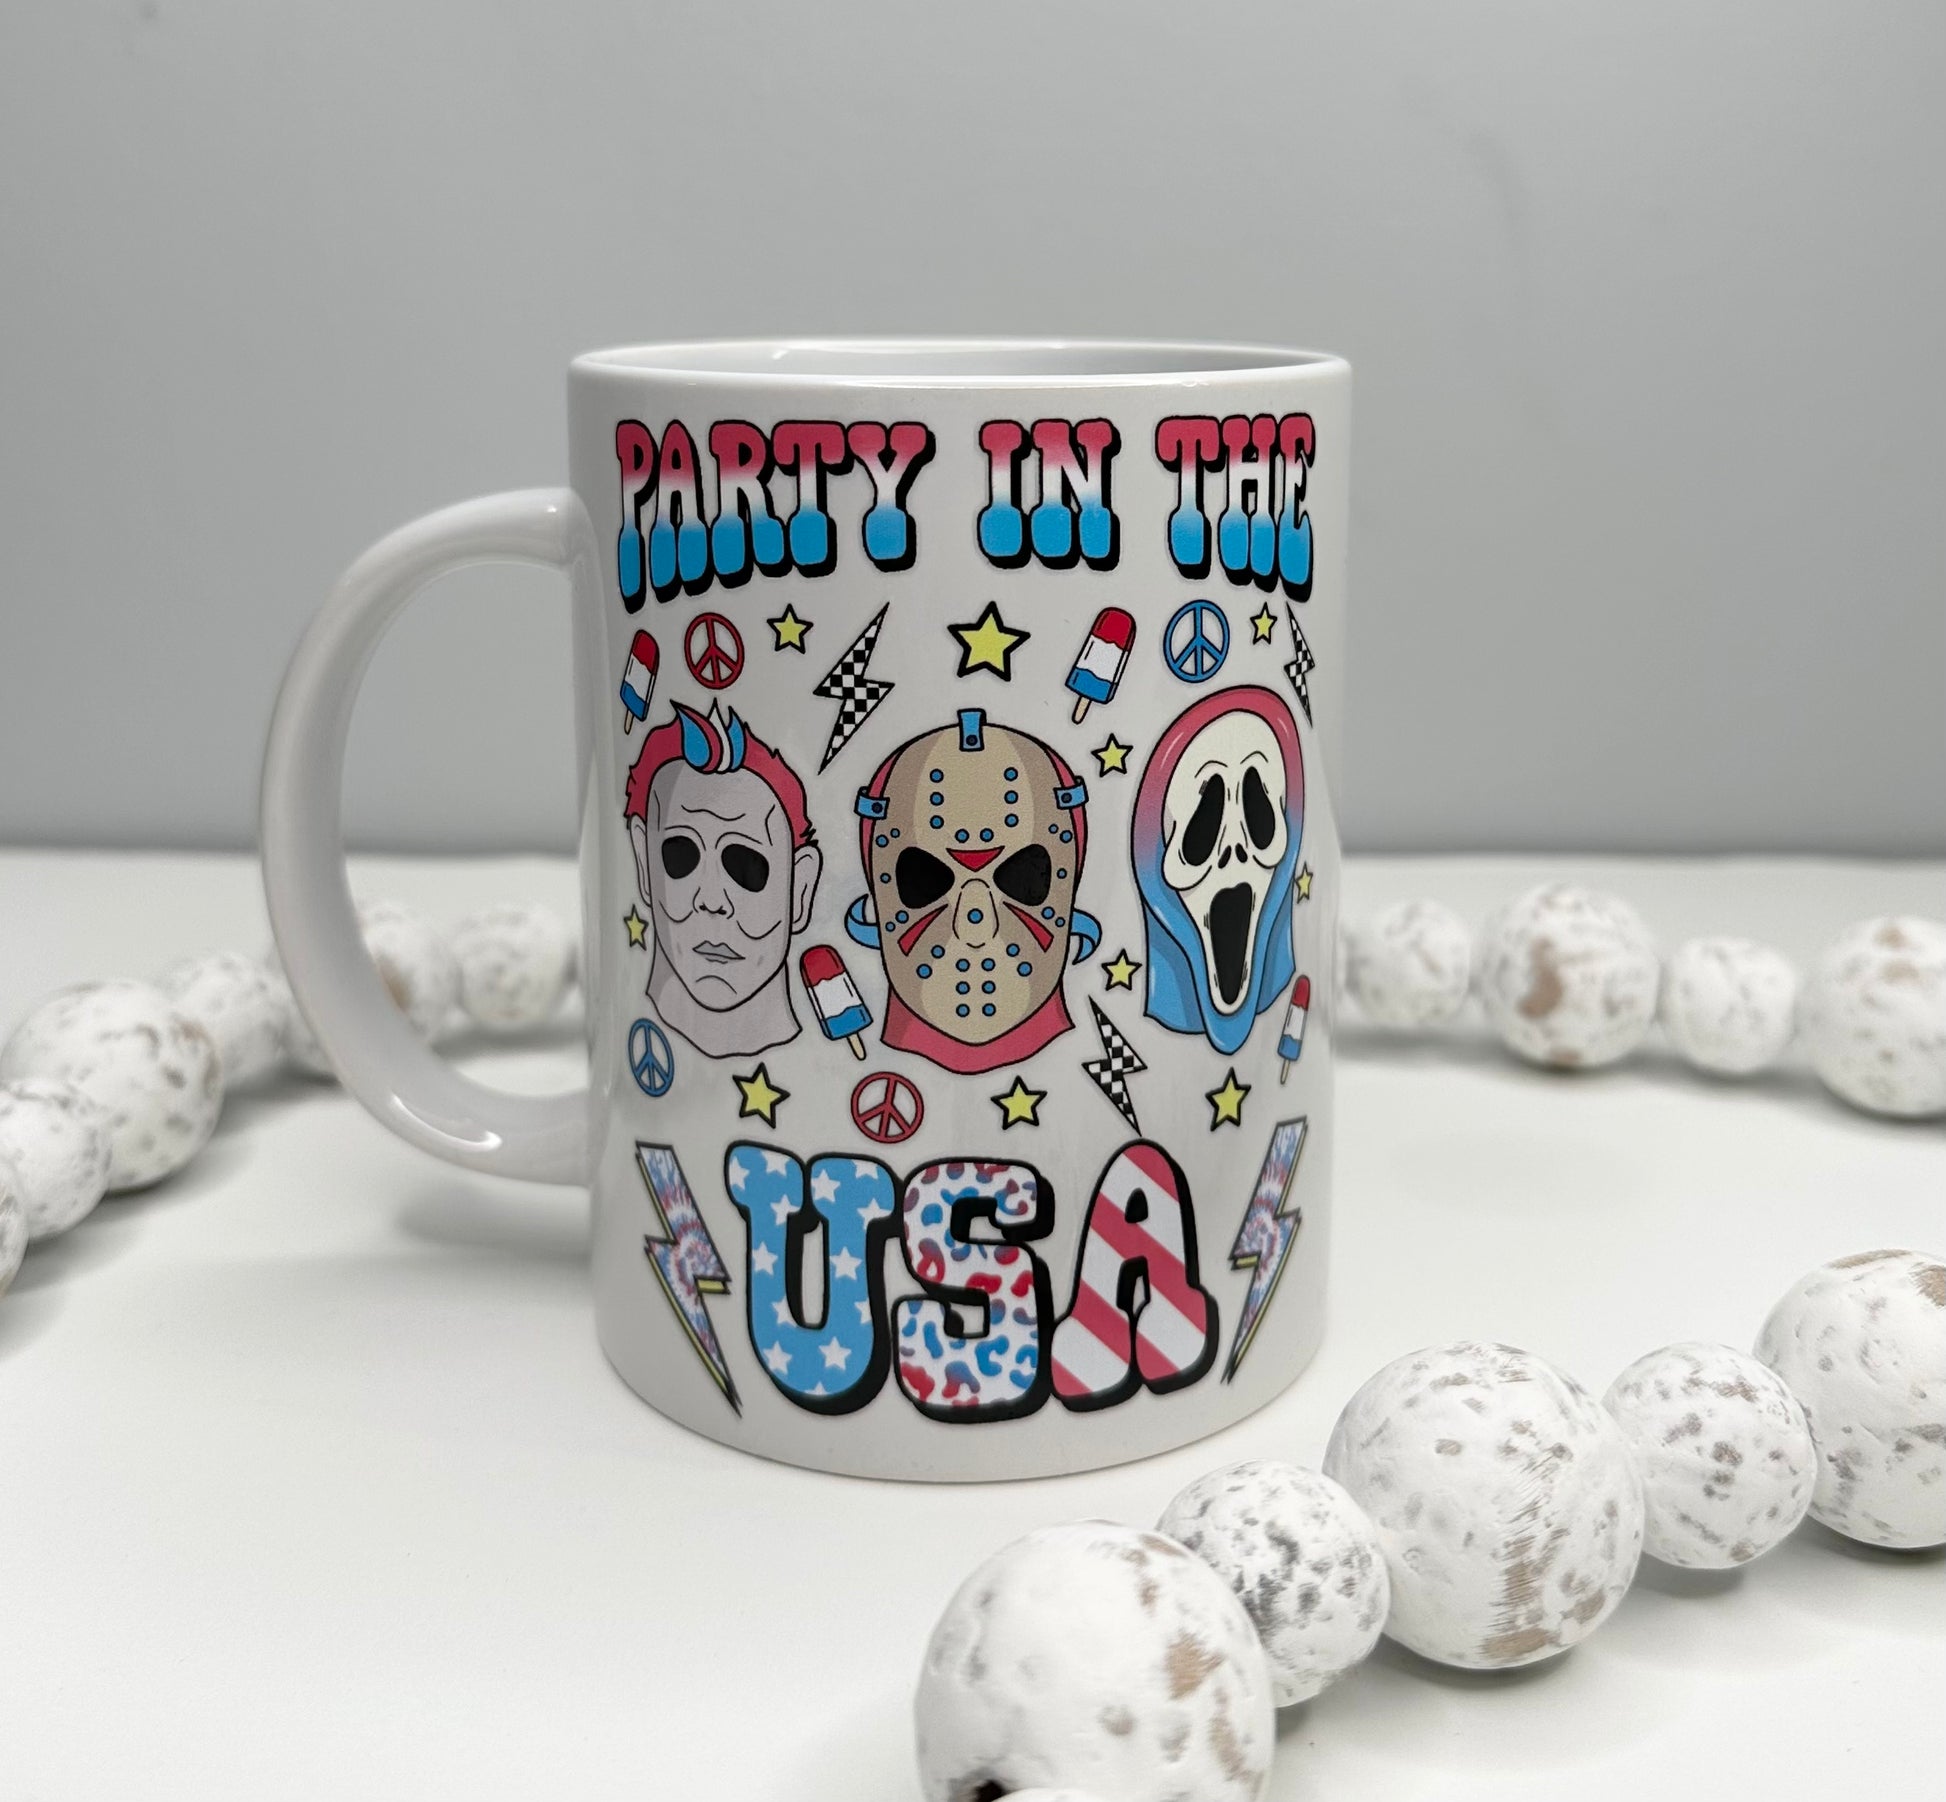 Party in the USA Mug - Willow Love Bug Designs 